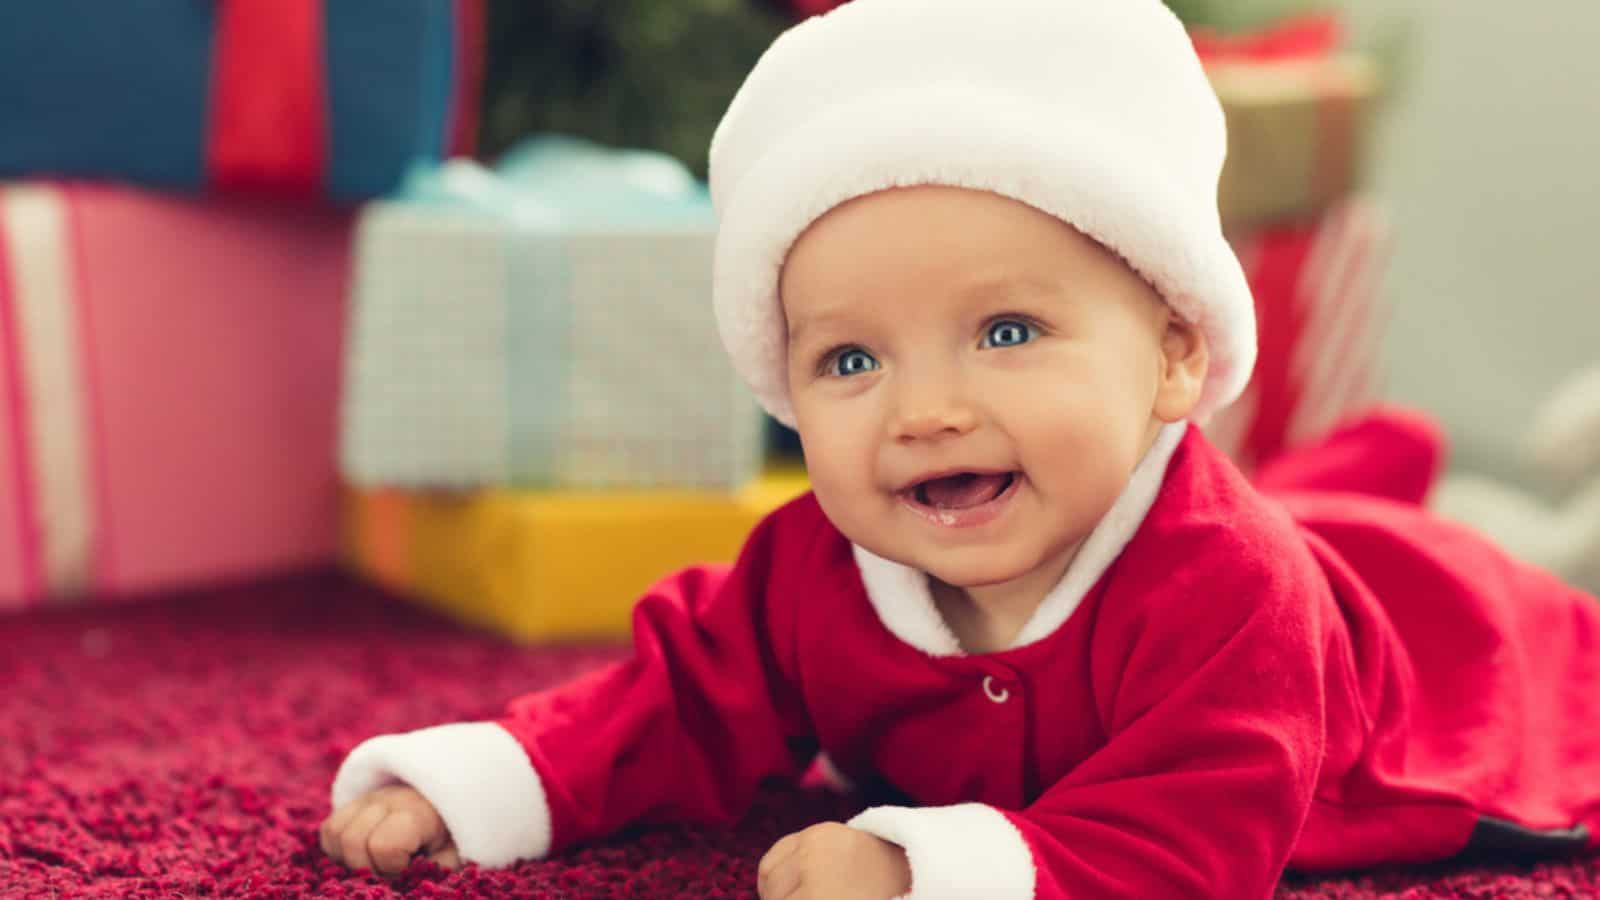 Laughing little baby in santa suit lying on red carpet